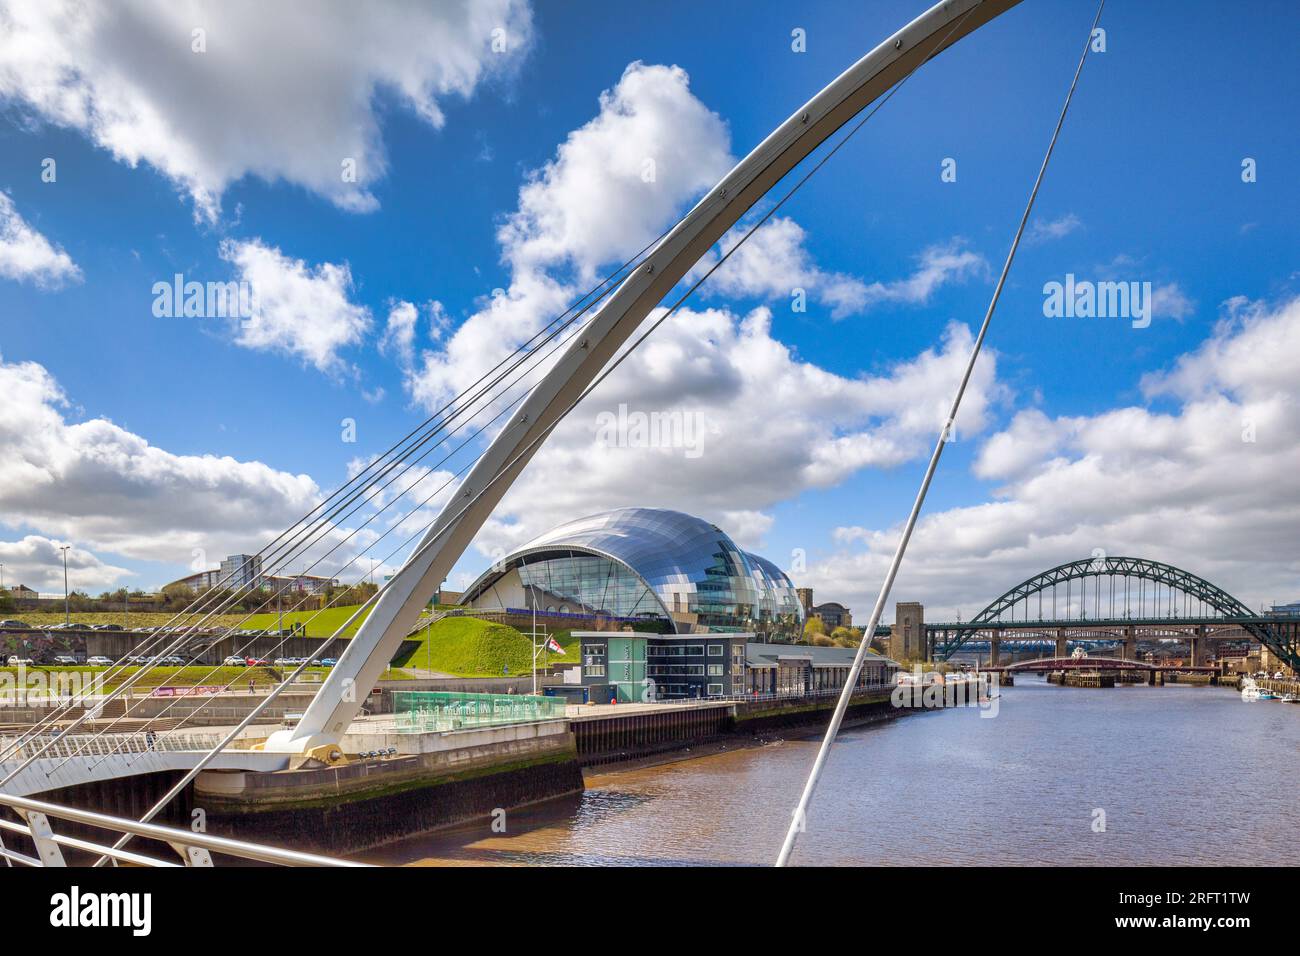 22 April 2016: Newcastle-upon-Tyne, Tyne and Wear, England, UK - The Tyne Bridges and the Gateshead Sage, by Foster and Partners, from the Millennium... Stock Photo